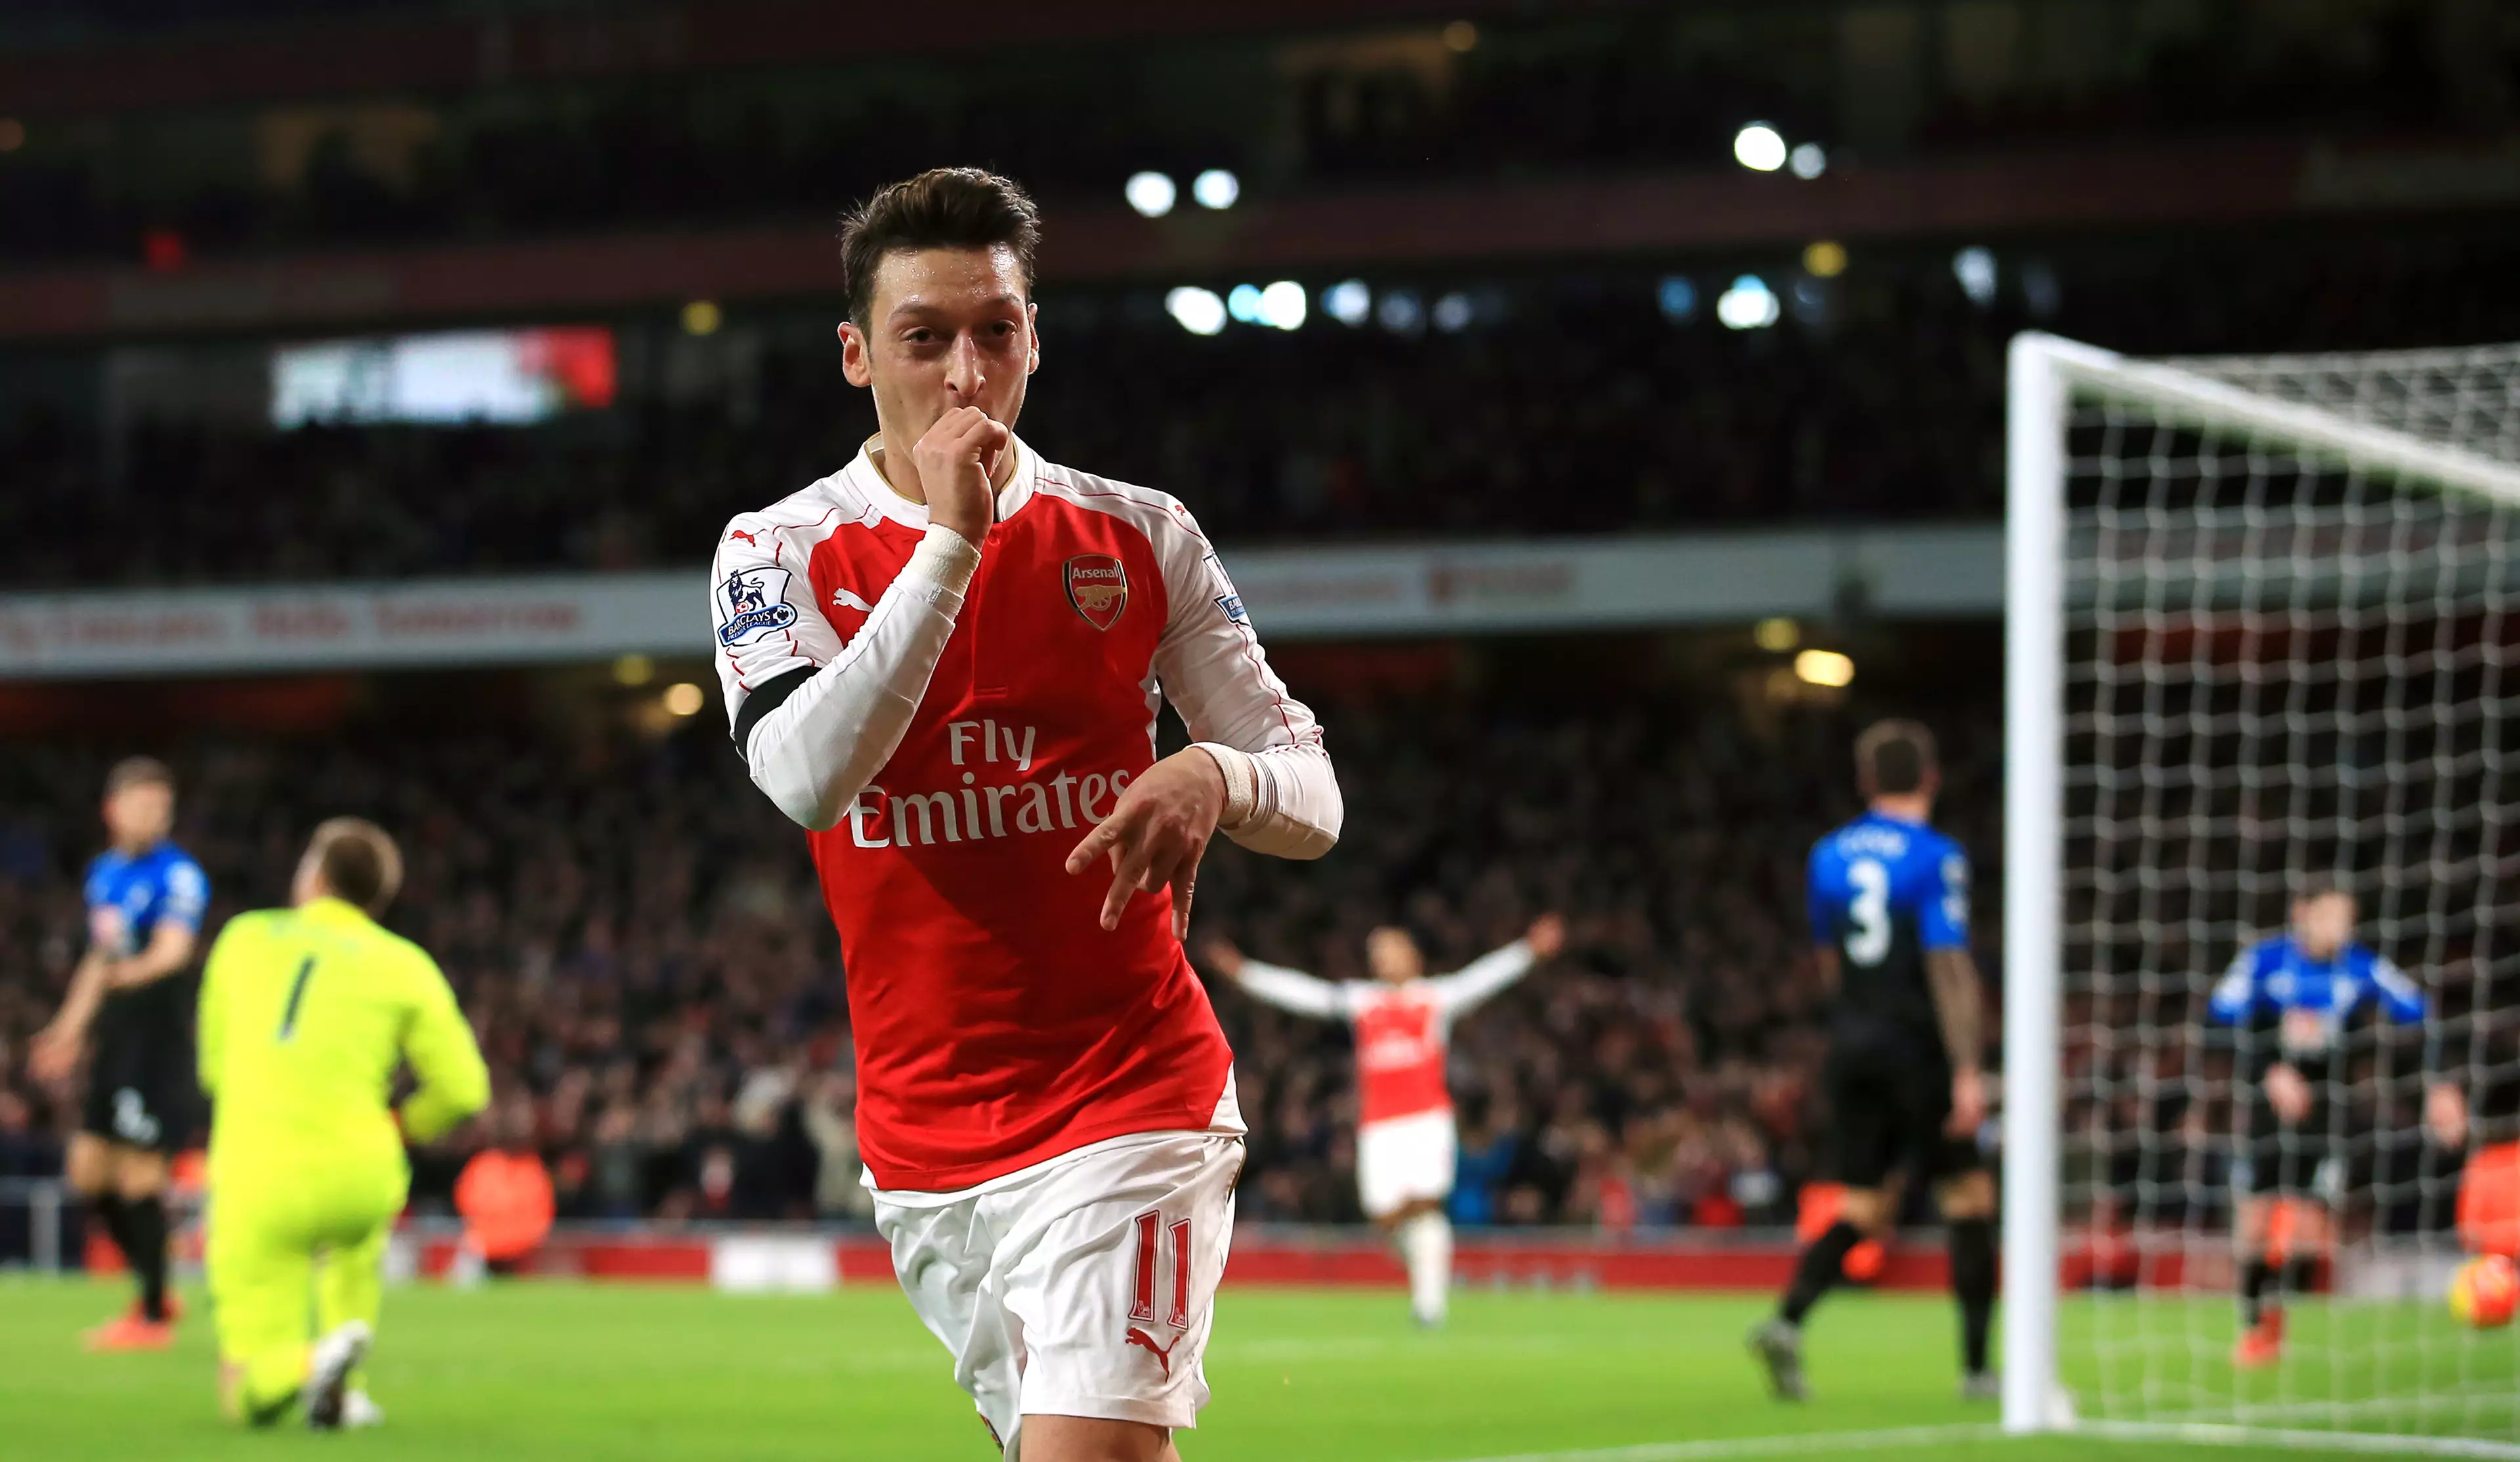 Could the Arsenal midfielder be about to make a move to Old Trafford? Image: PA Images.